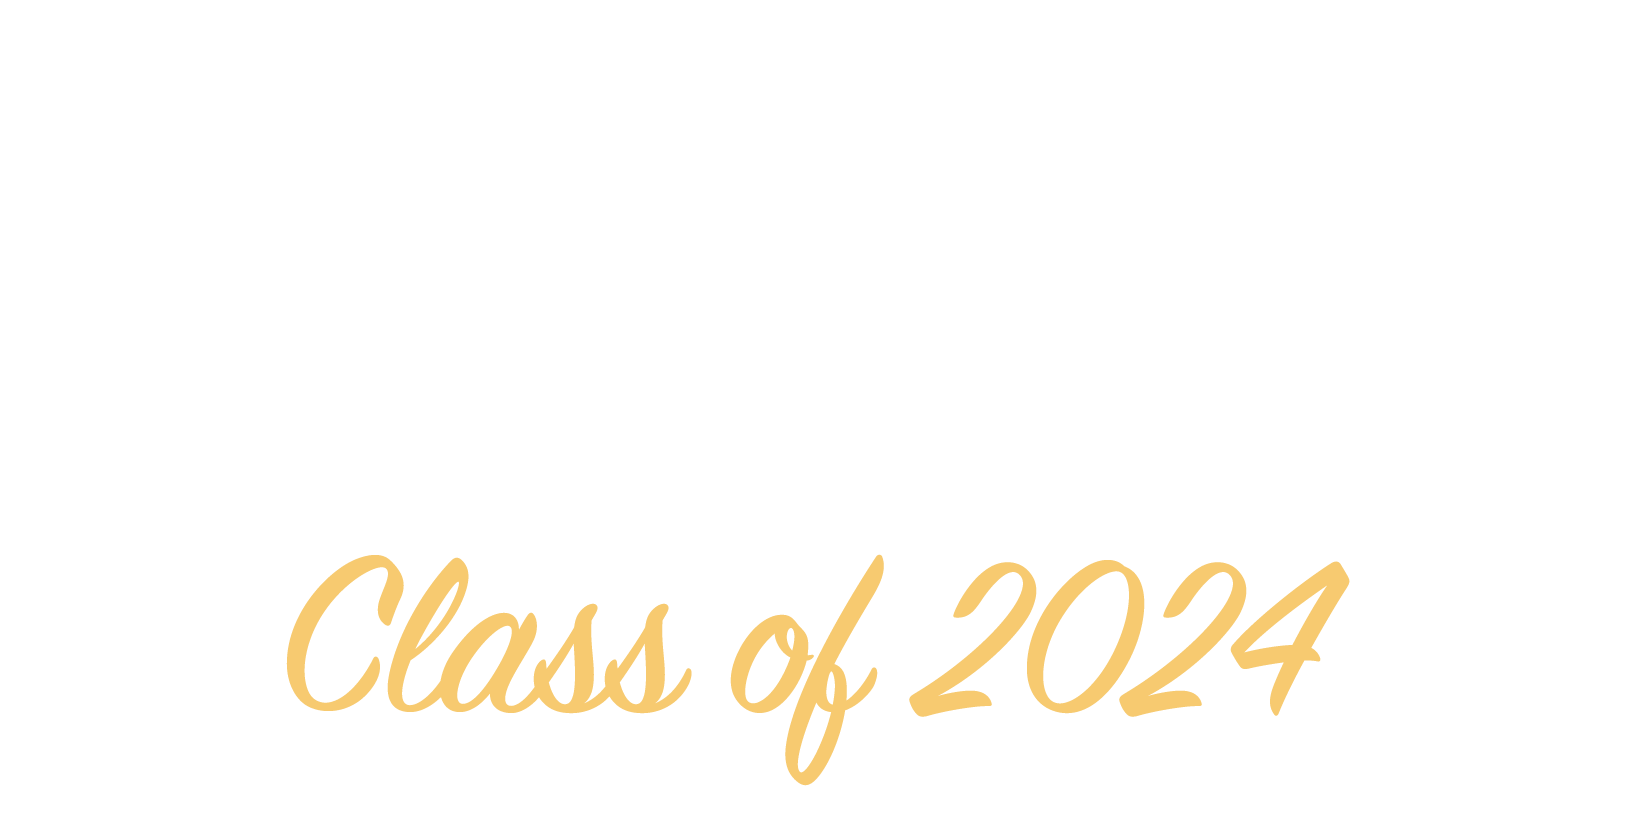 Top Places to Work in Communications Awards Luncheon 2024